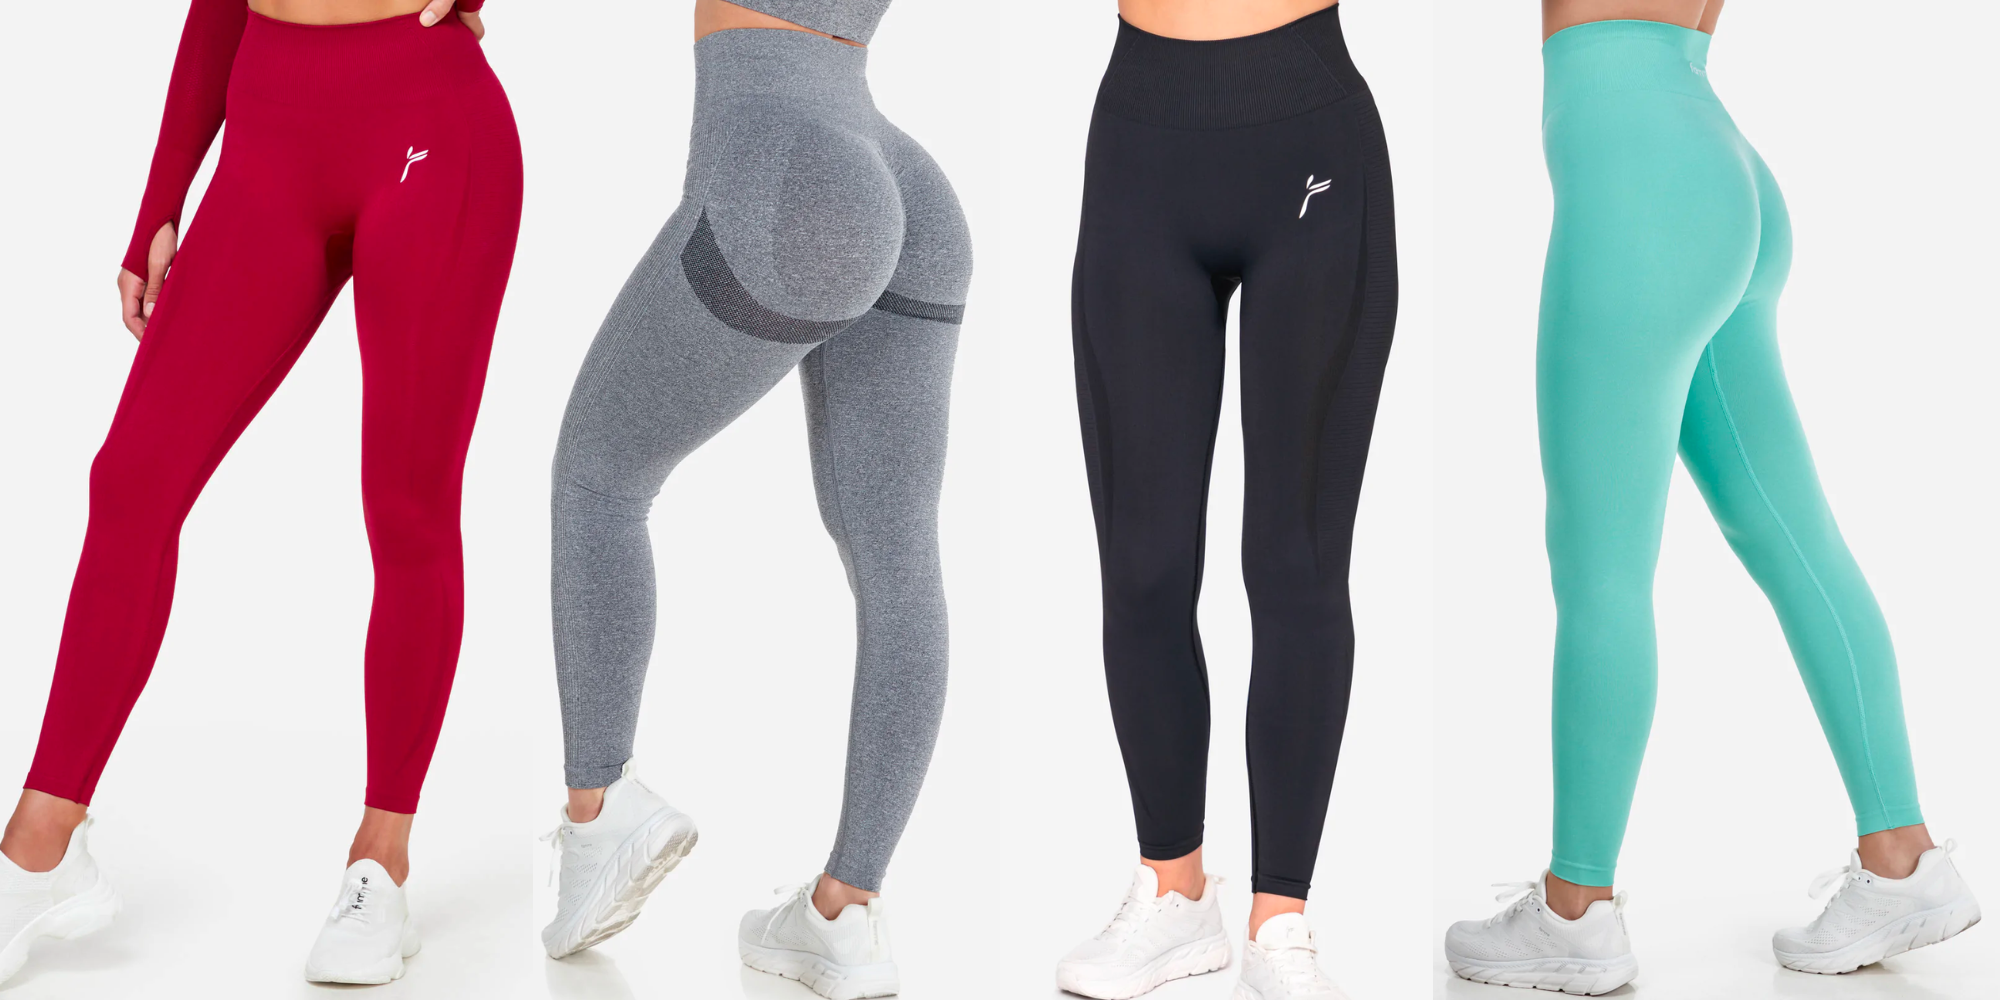 Tights guide - All about training tights for women - Free shipping